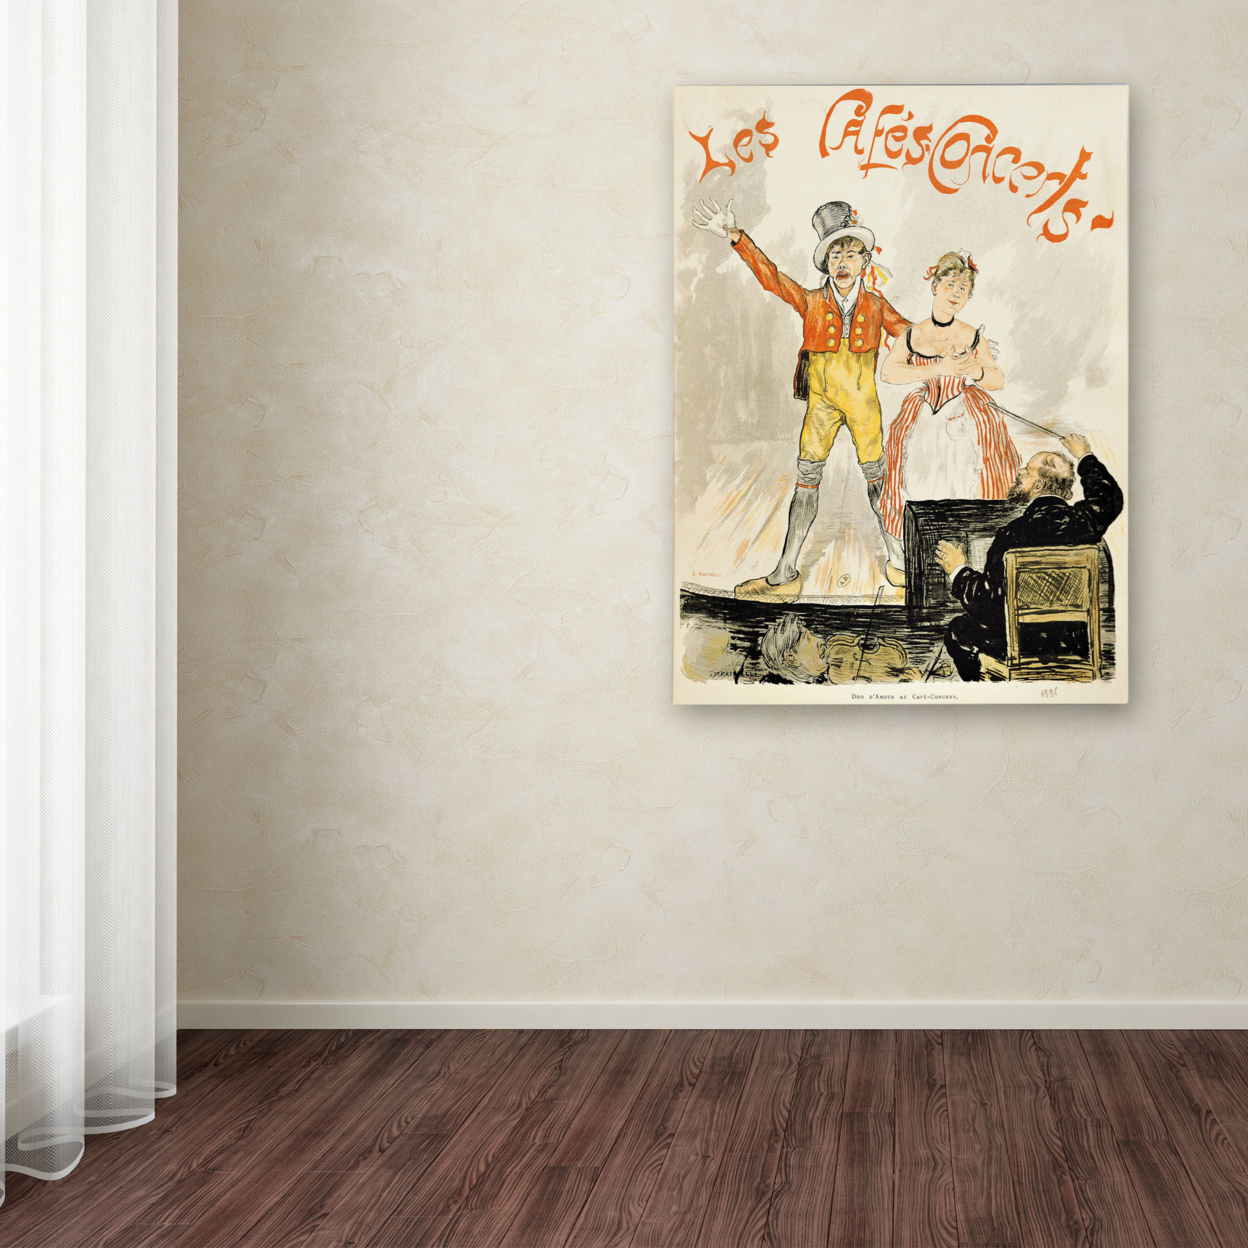 Poster Of Stage Performance At Cafe Chantant' Canvas Wall Art 35 X 47 Inches